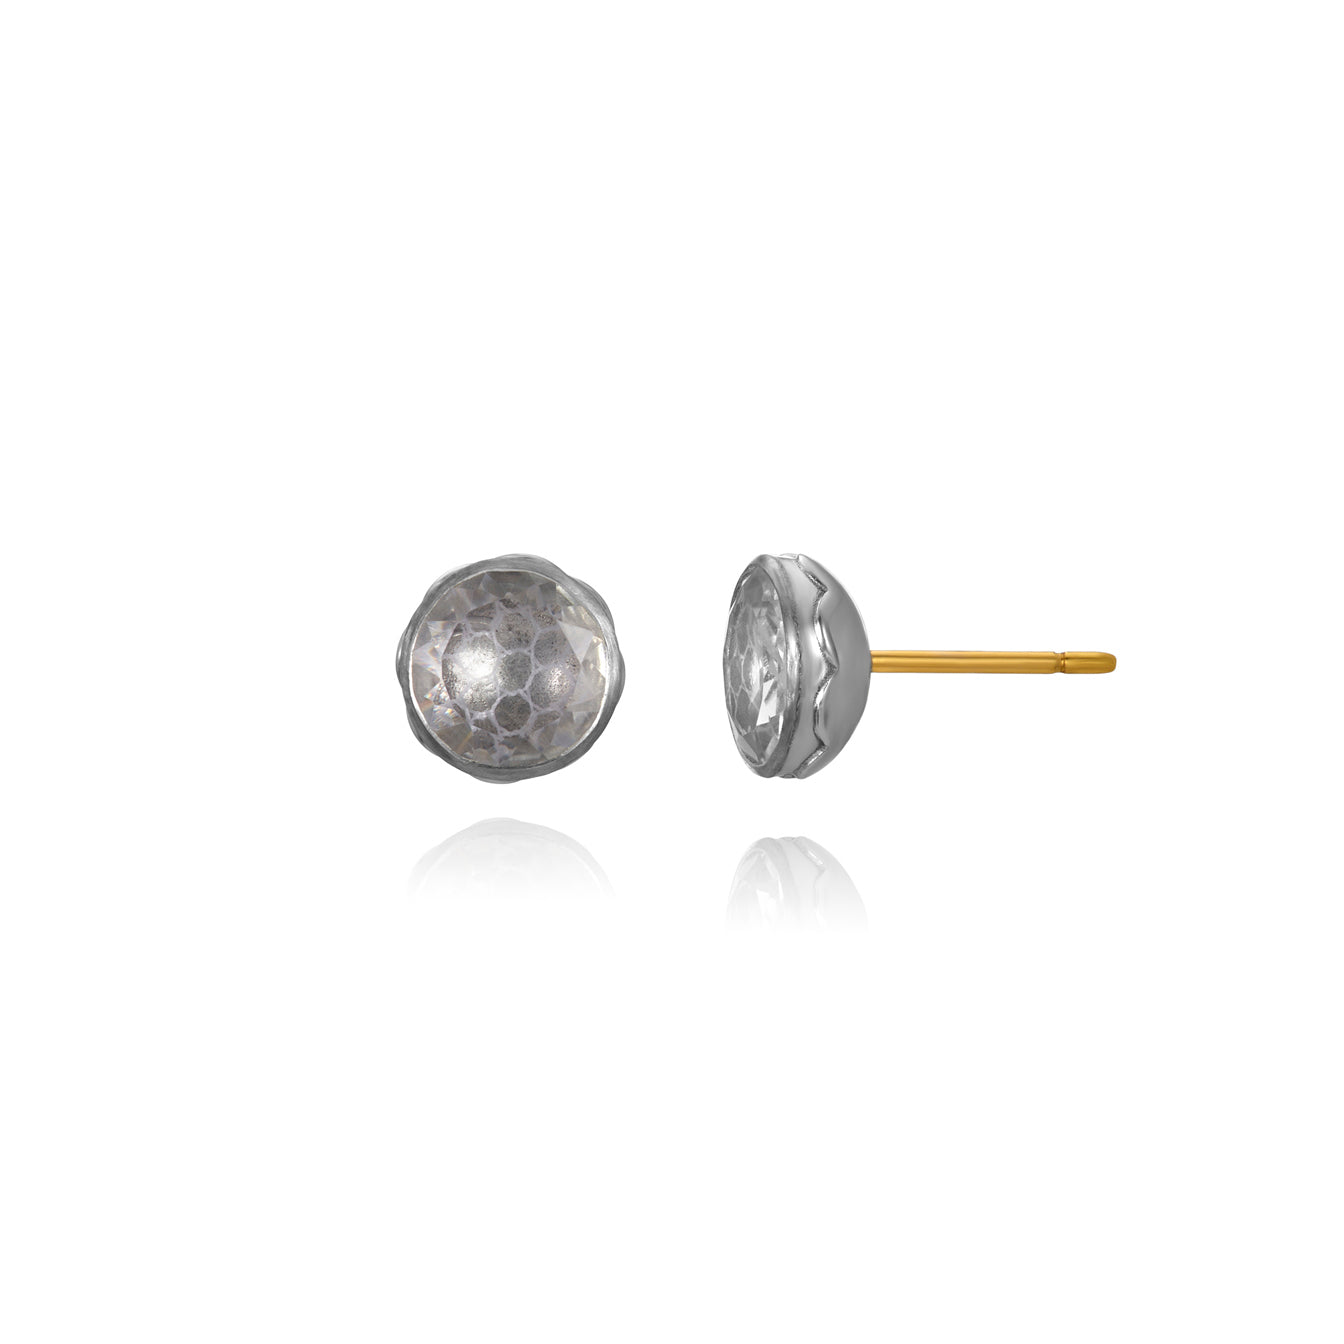 L&H Bride Round Stud Earrings in Veil (White Rhodium or Yellow Gold Wash)